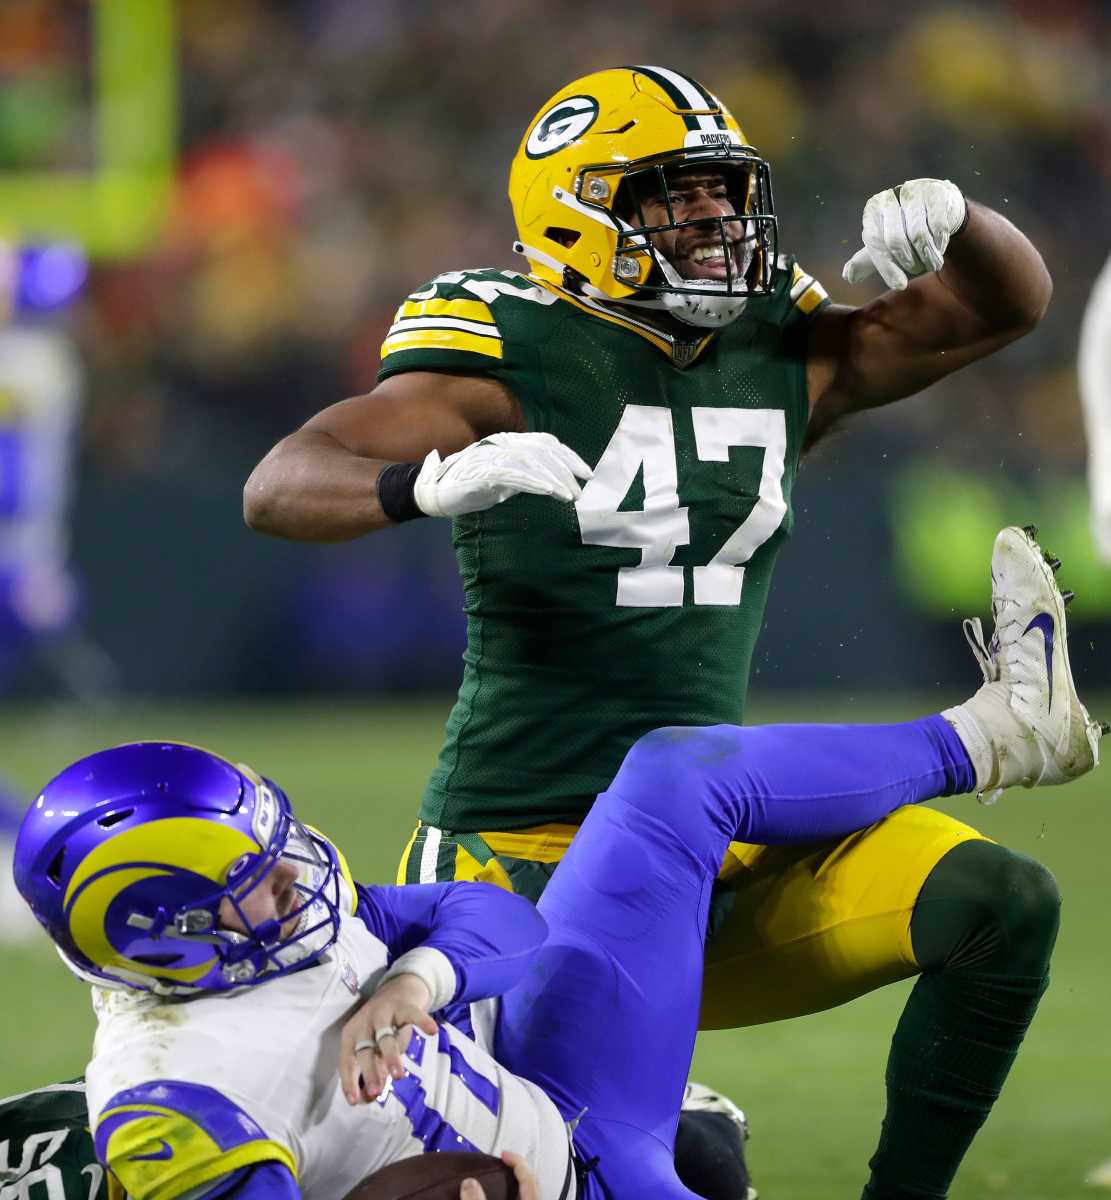 Green Bay Packers receiver, former Alcoa star Randall Cobb getting into the  7-on-7 world; holding tryouts locally on Sunday, Dec. 11 - Five Star Preps